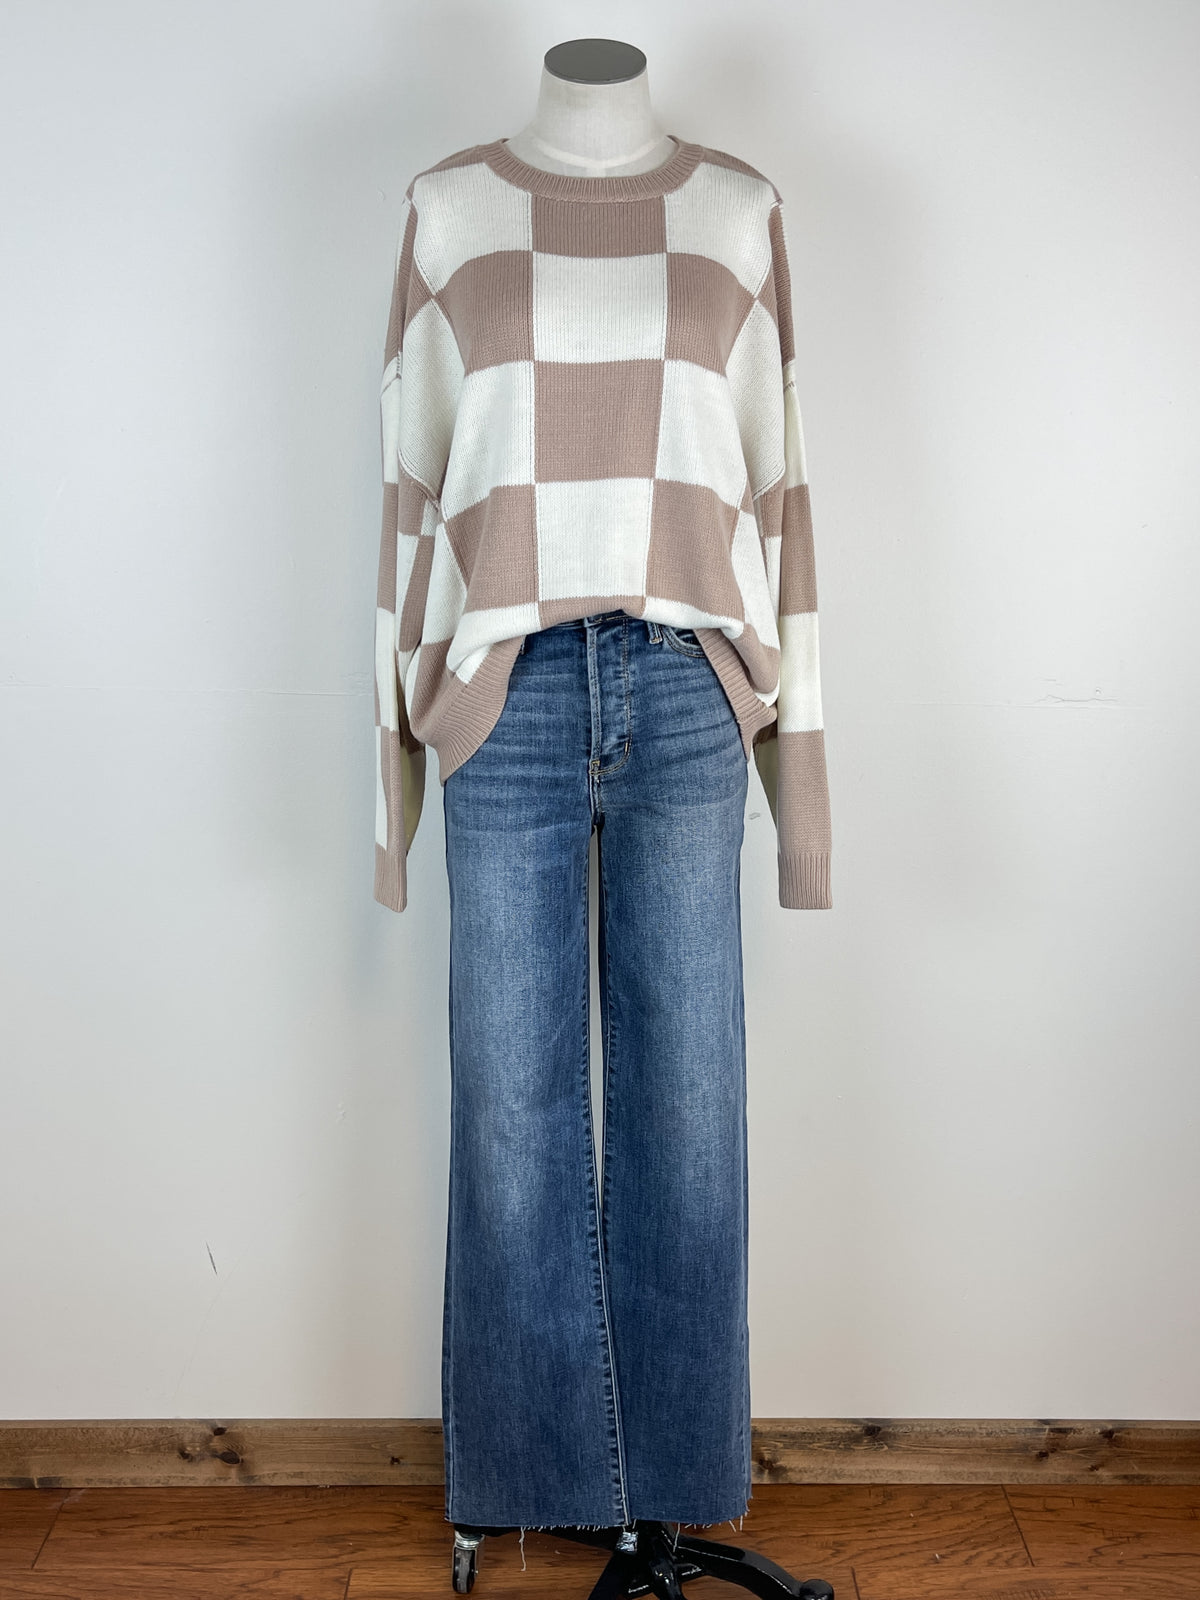 Kara Check Print Sweater in Off White/Taupe